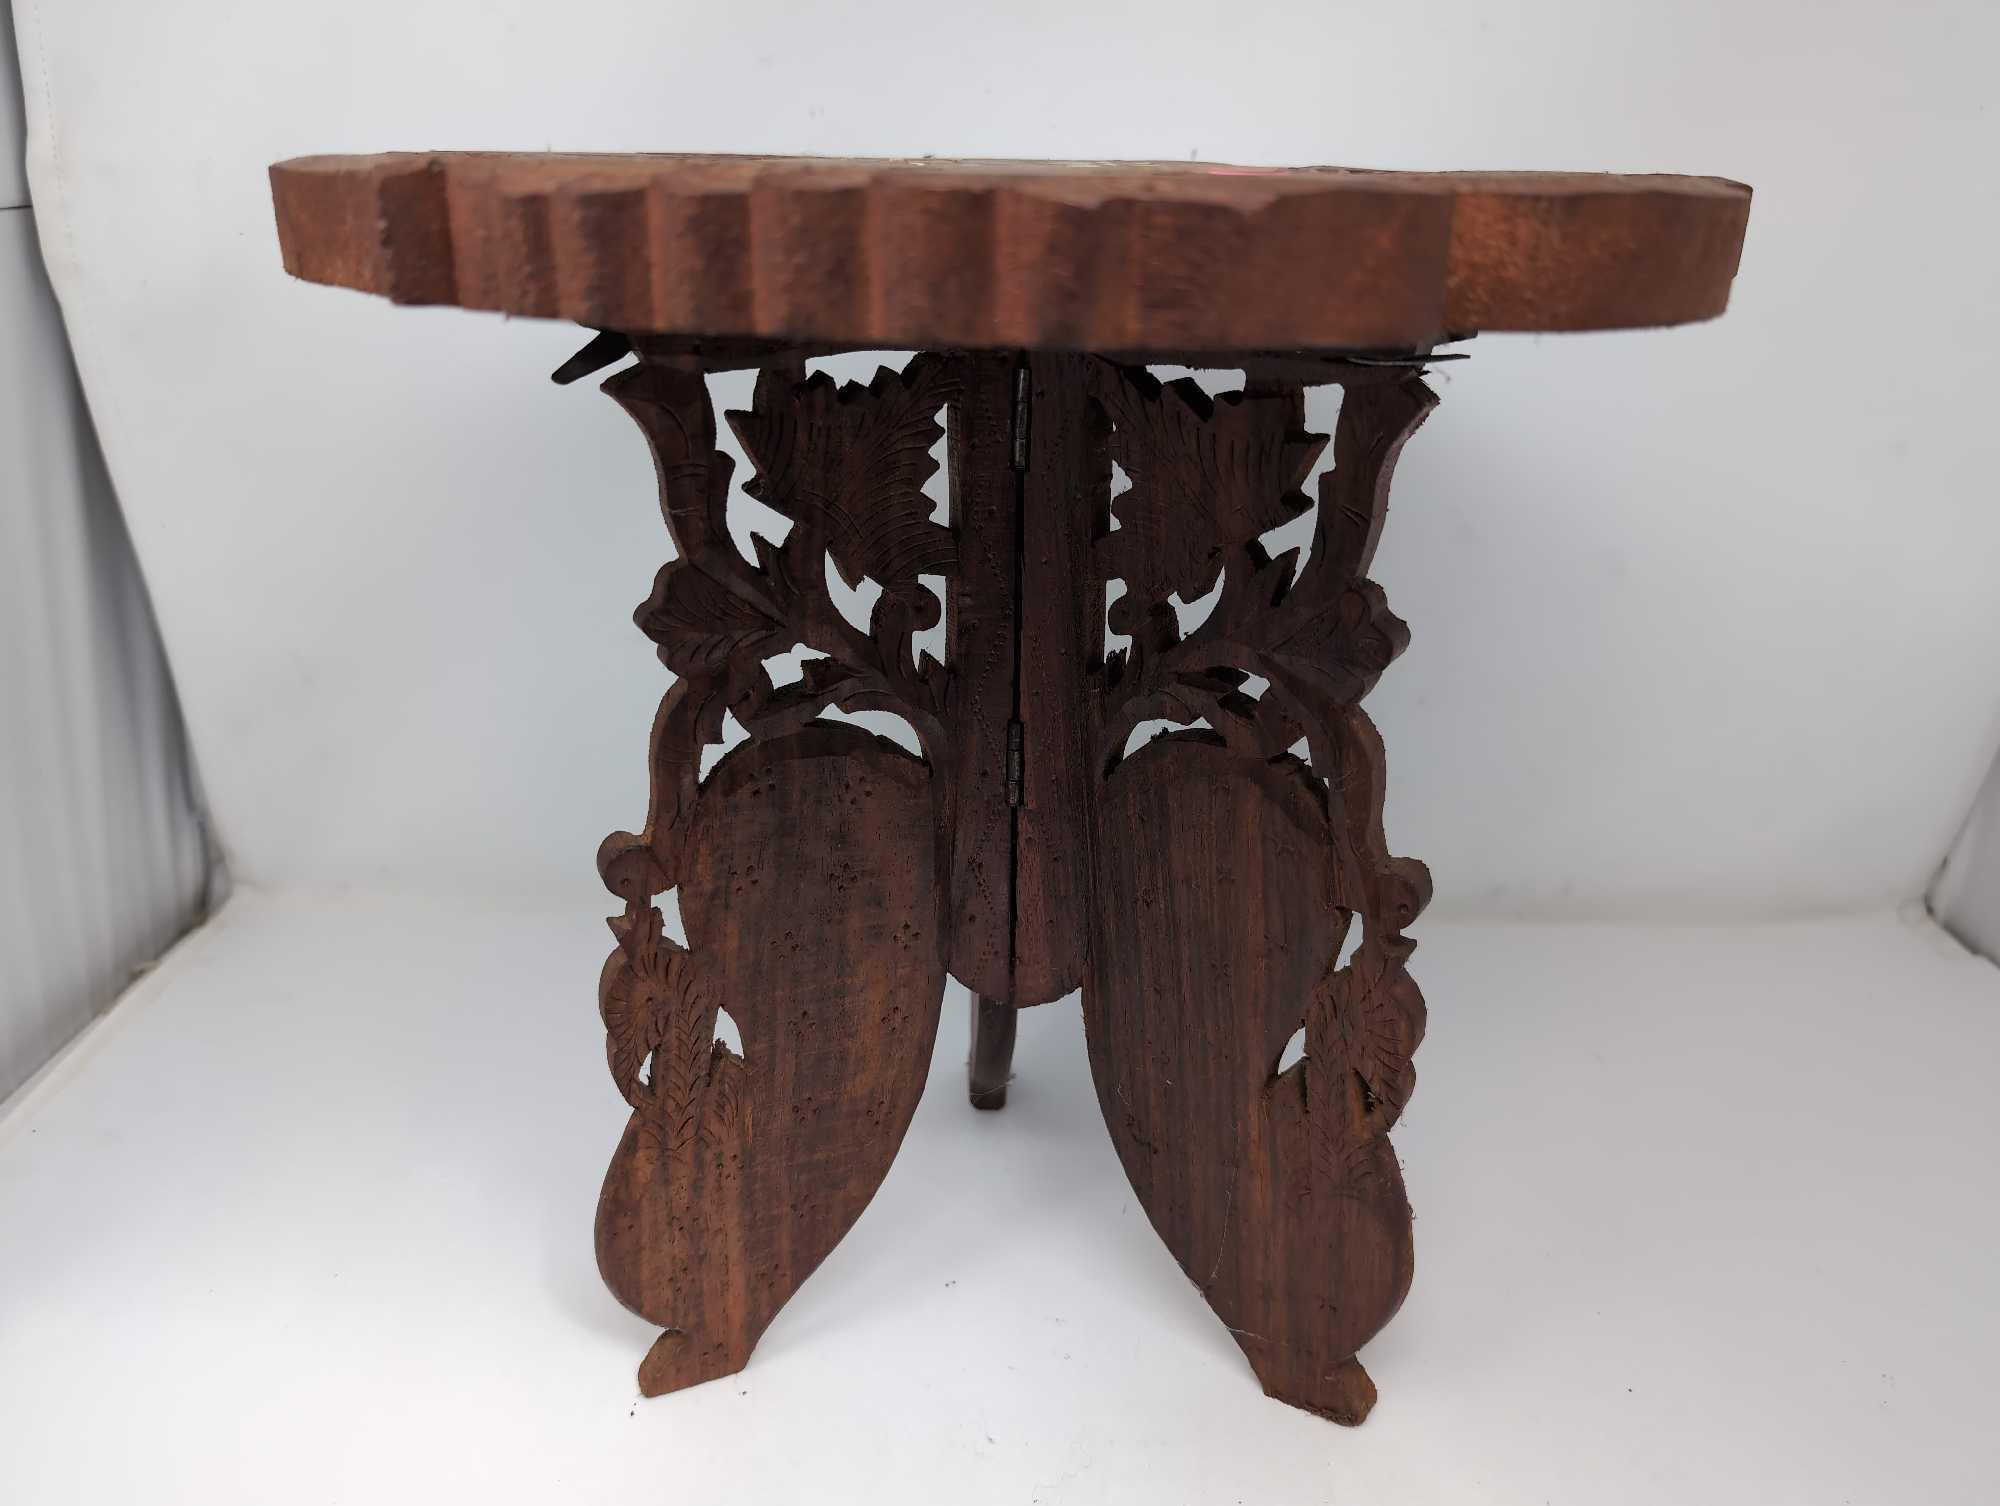 (LR) ANTIQUE HAND CARVED INDIAN PLANT STAND TABLE DEPICTING A FISH DETAILED TOP, INLAID WITH BOVINE.